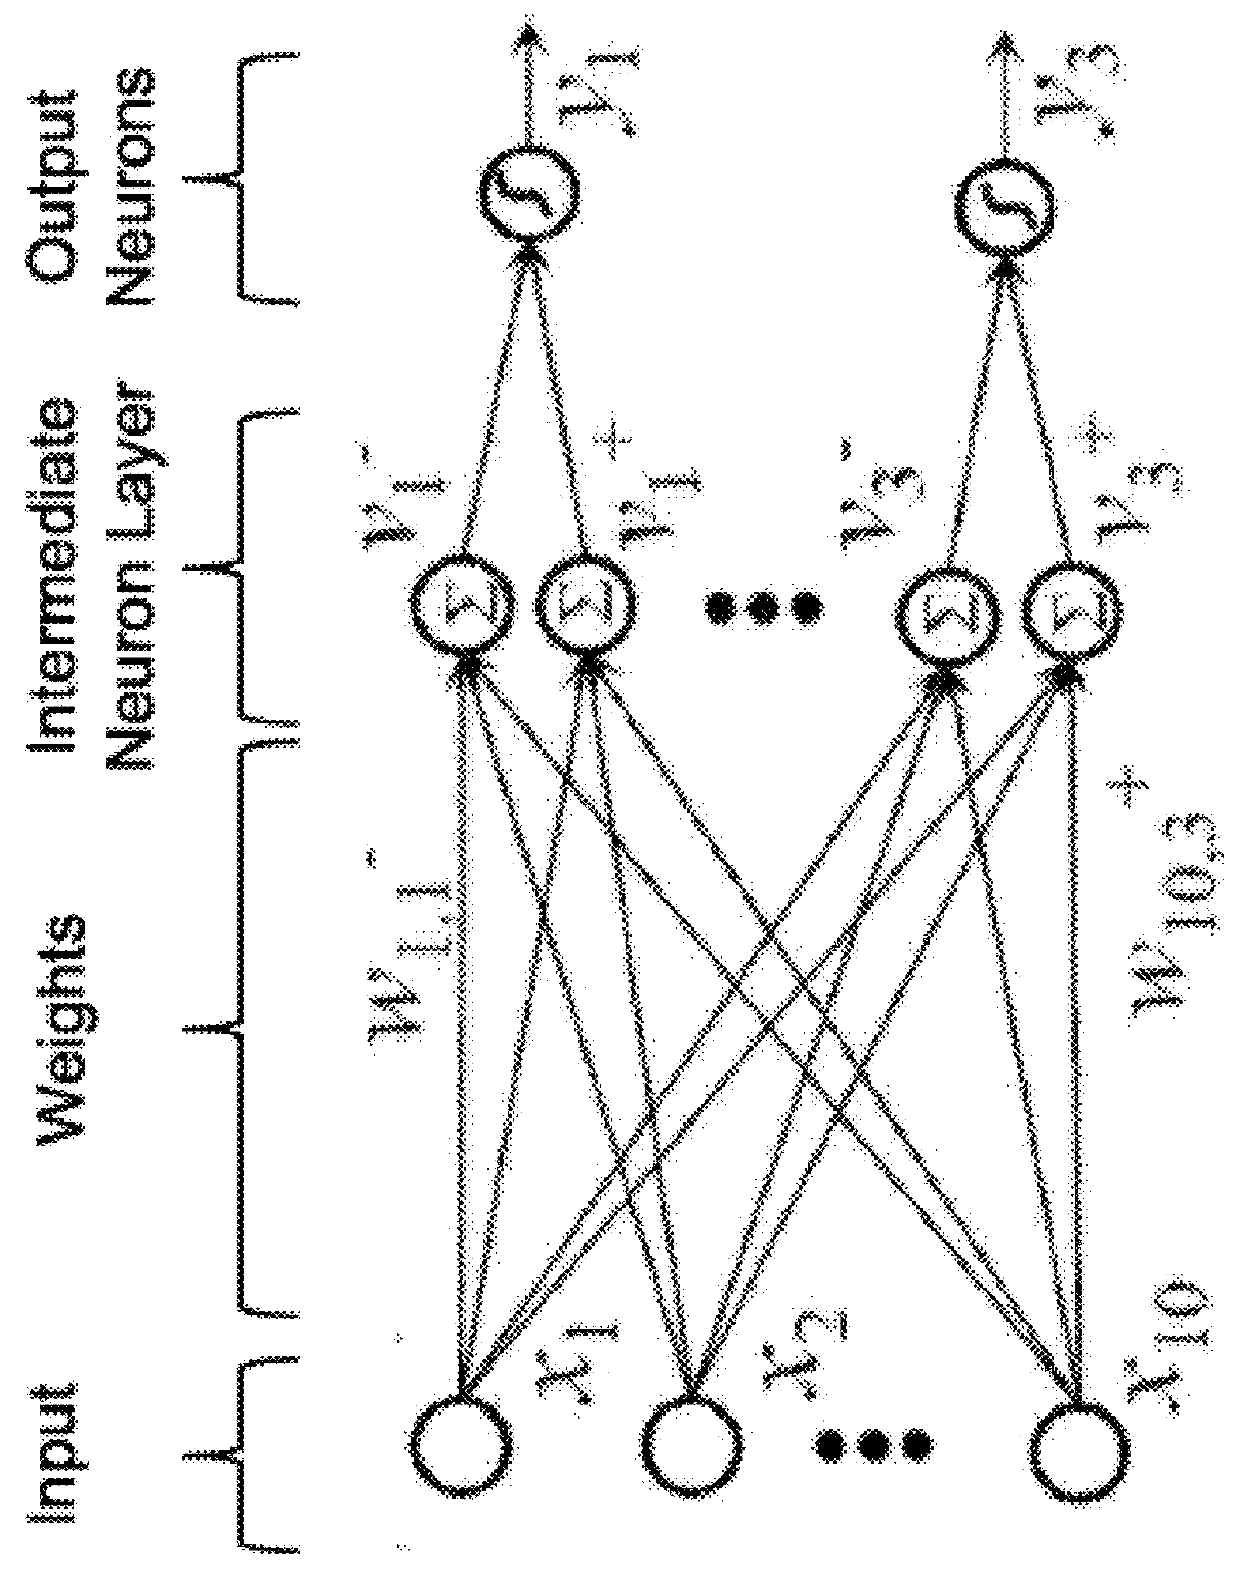 High Precision And Highly Efficient Tuning Mechanisms And Algorithms For Analog Neuromorphic Memory In Artificial Neural Networks